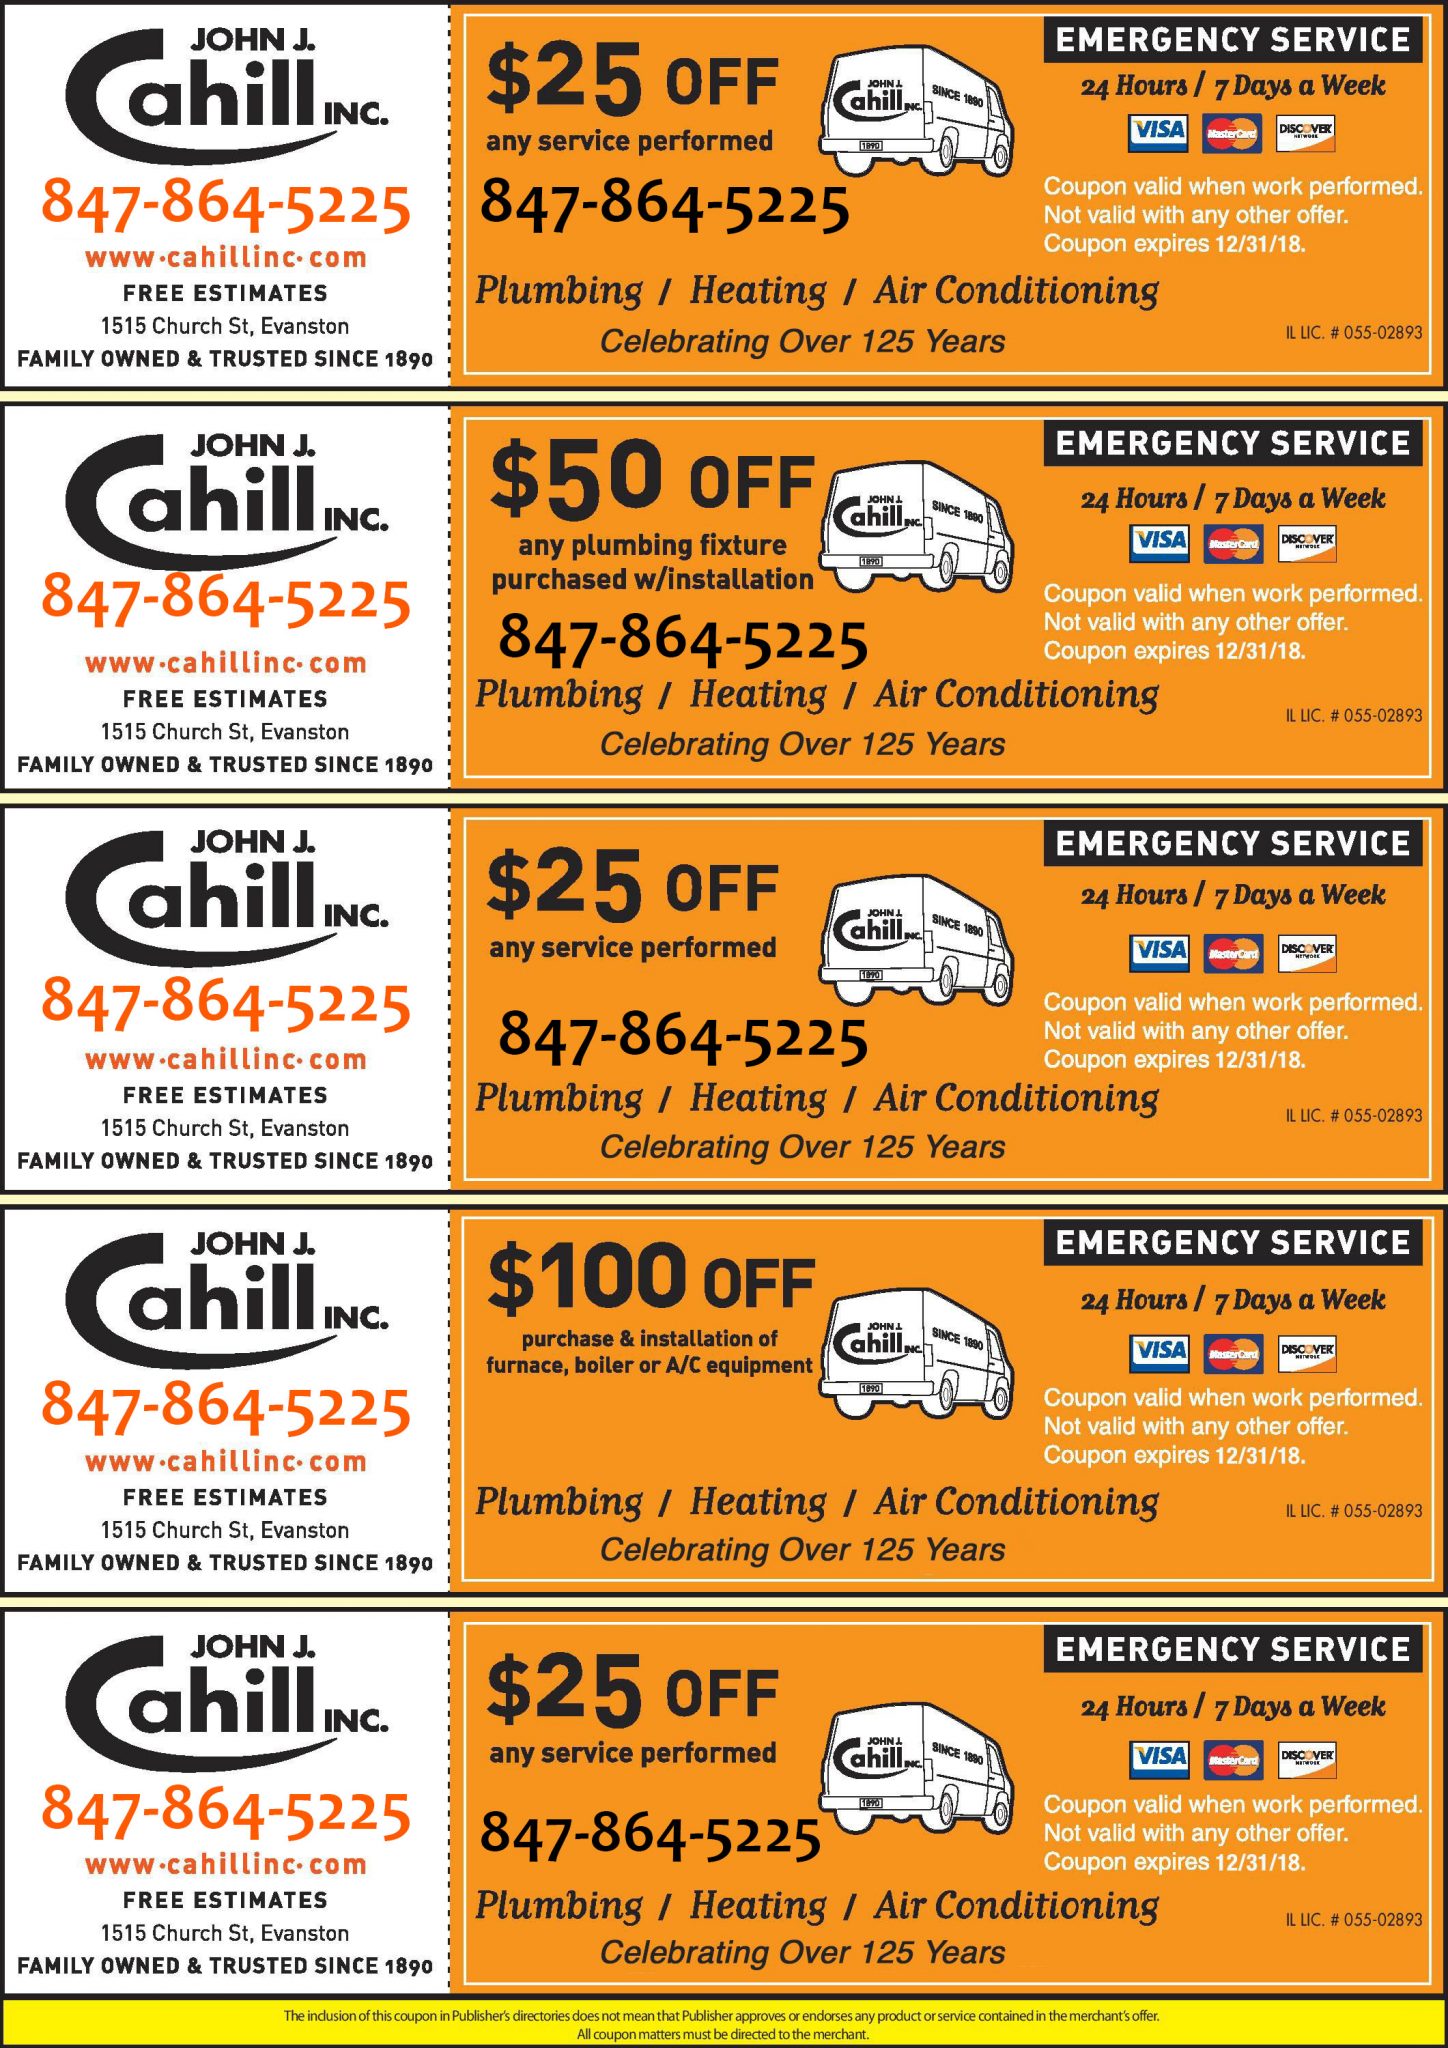 Special Offers from Cahill Inc